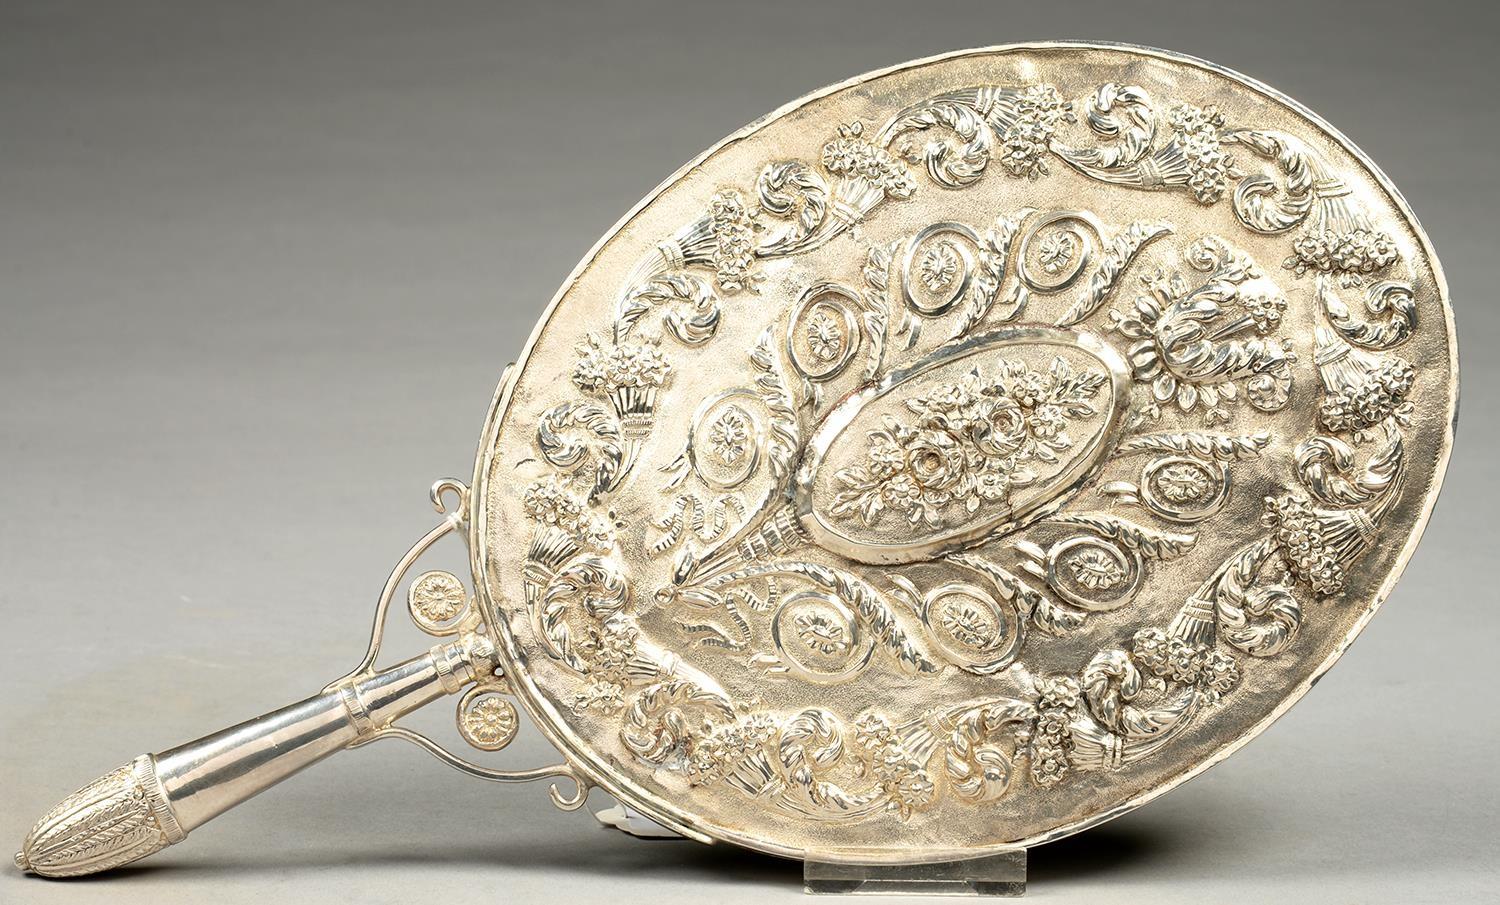 AN OTTOMAN SILVER HAND MIRROR, CHASED IN HIGH RELIEF WITH ROSES AND OTHER FLOWERS FRAMED BY